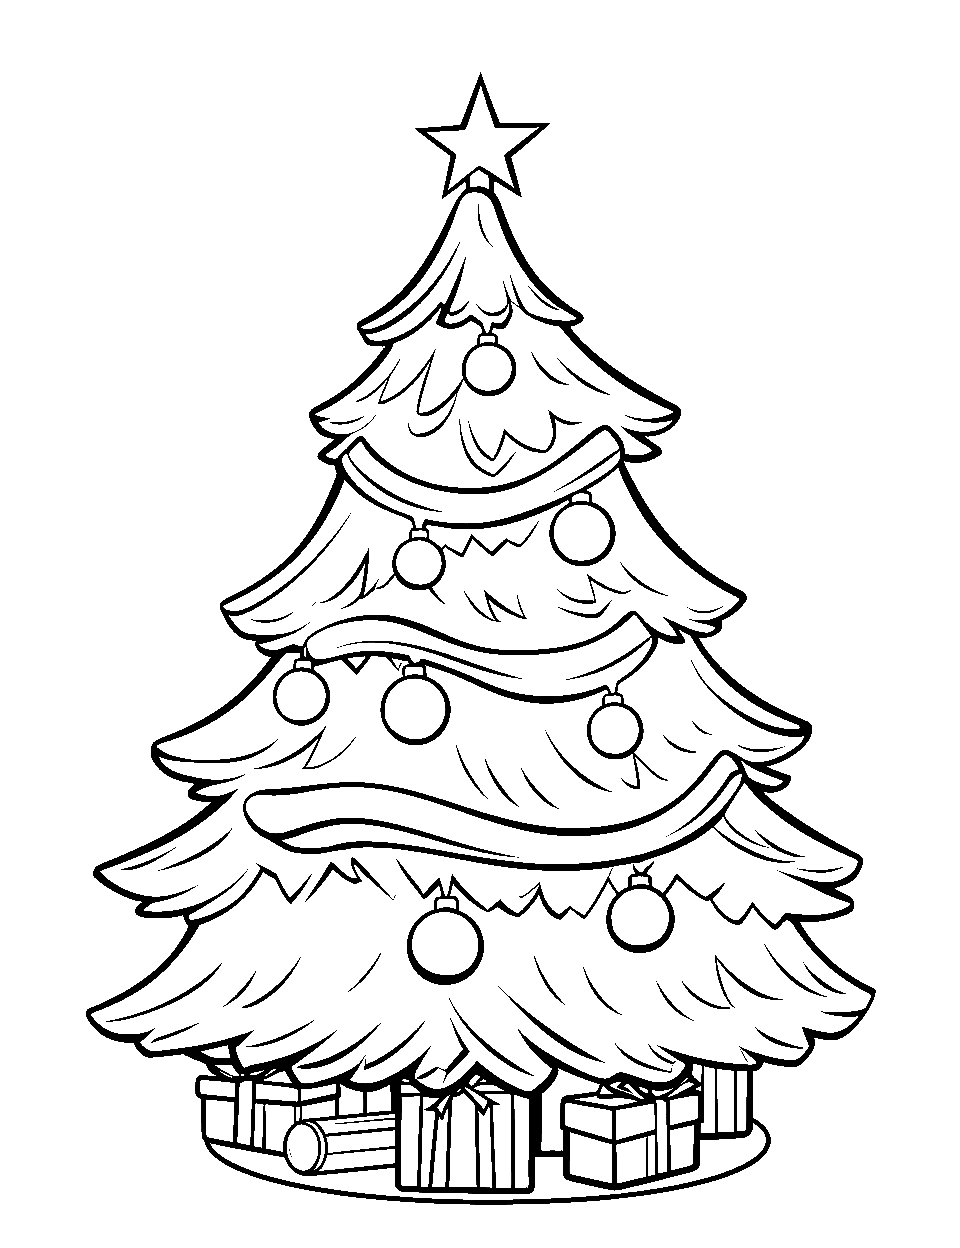 Simple Christmas Tree Canvas Coloring Page - A Simple Christmas tree waiting to be adorned with imaginative colors.